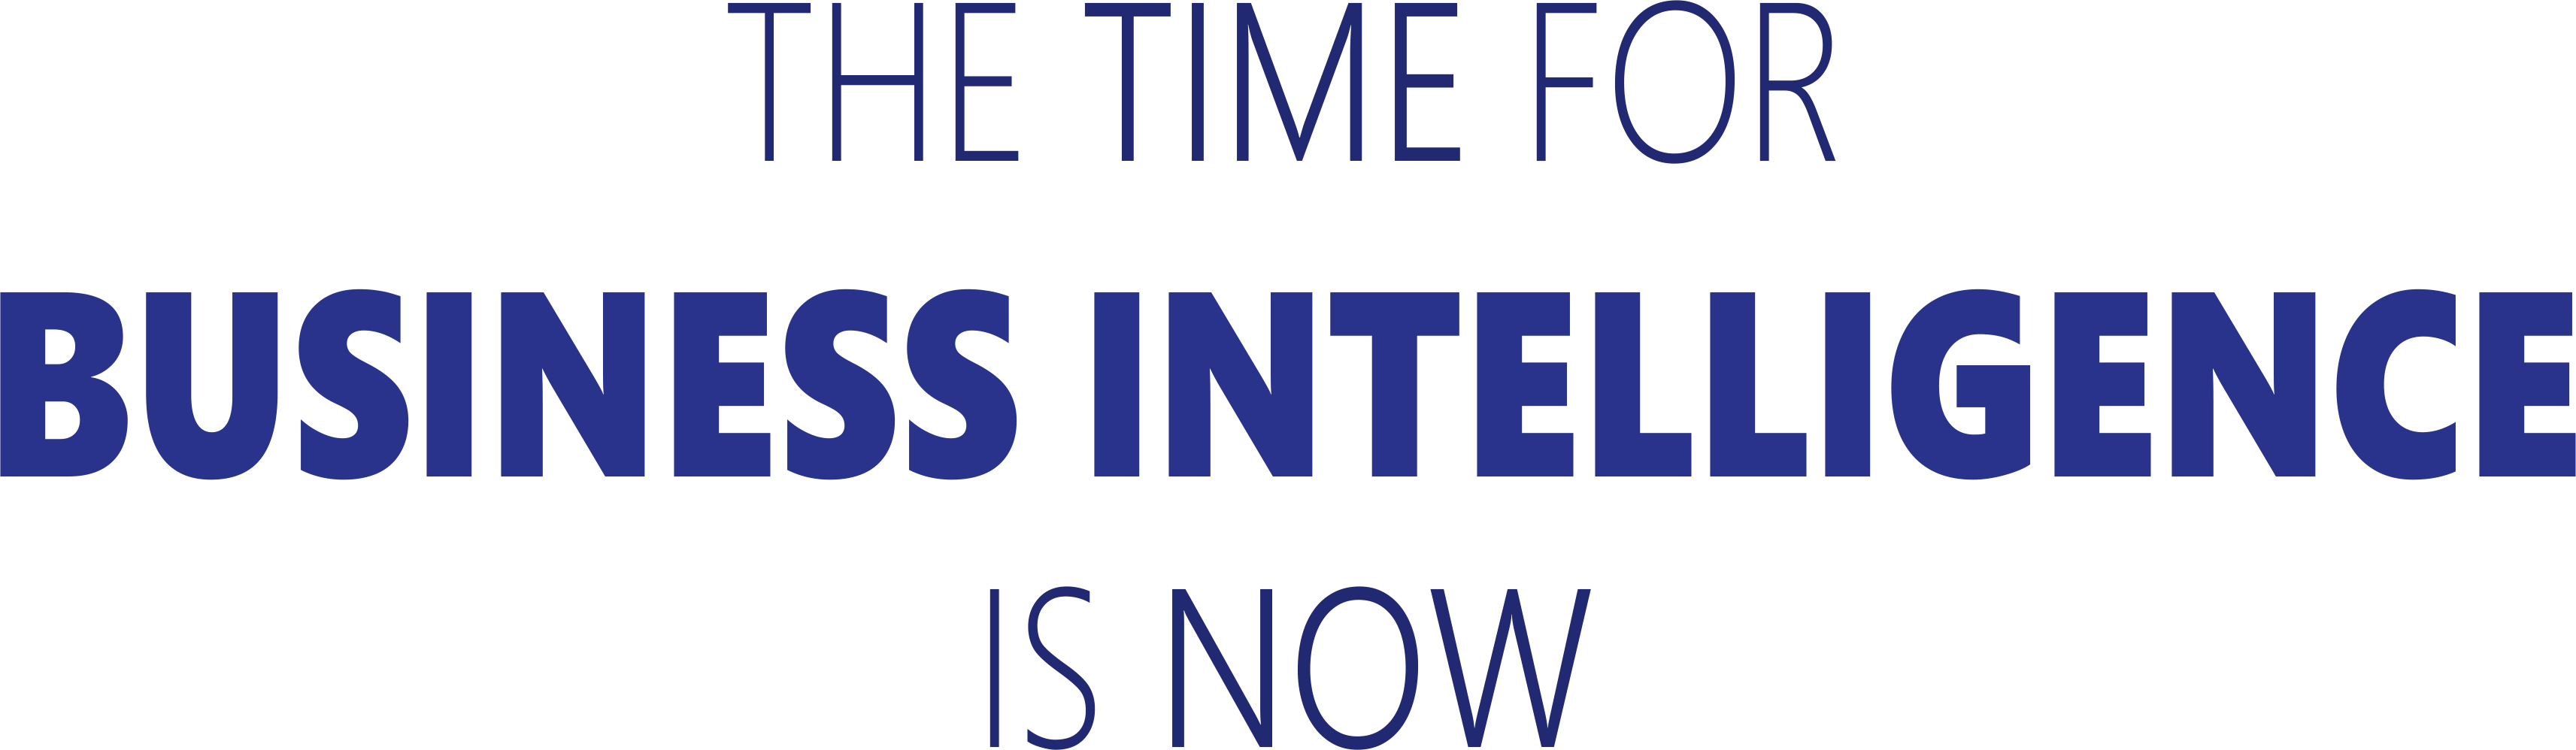 Business Intelligence - Now More Important than Ever!